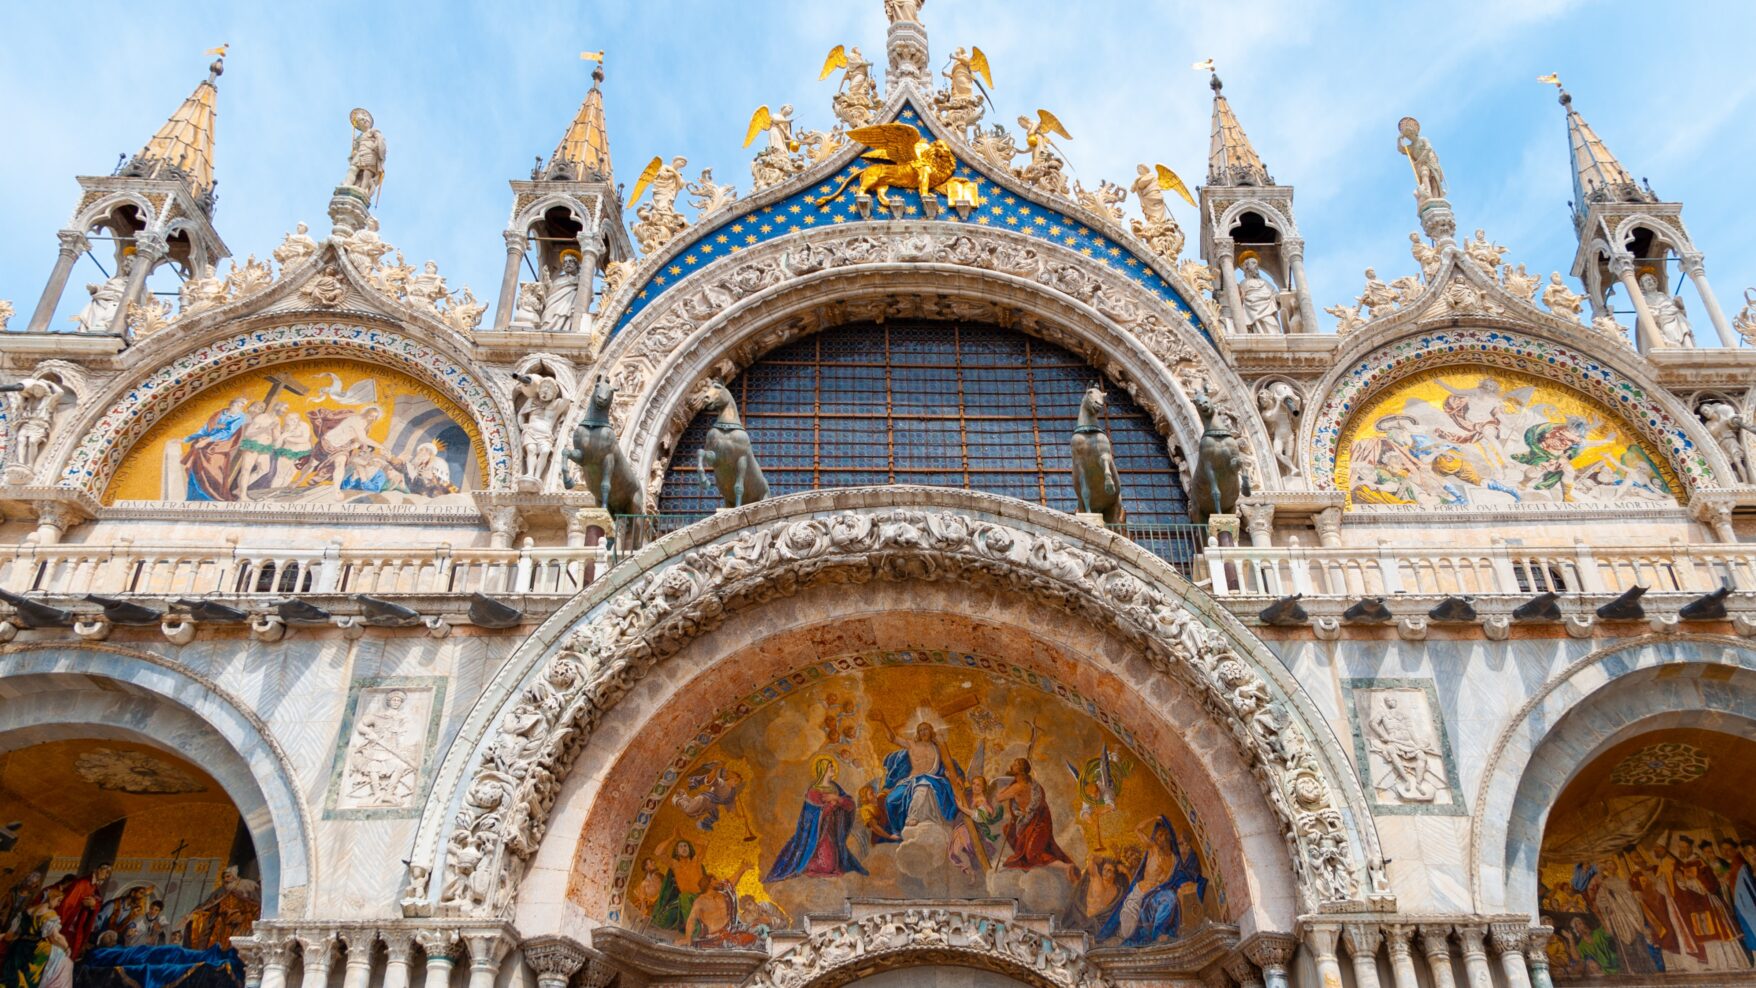 San Marco Basilica in Venice. Ornate statues, arches, and steeples with frescos and gold and blue decoration.